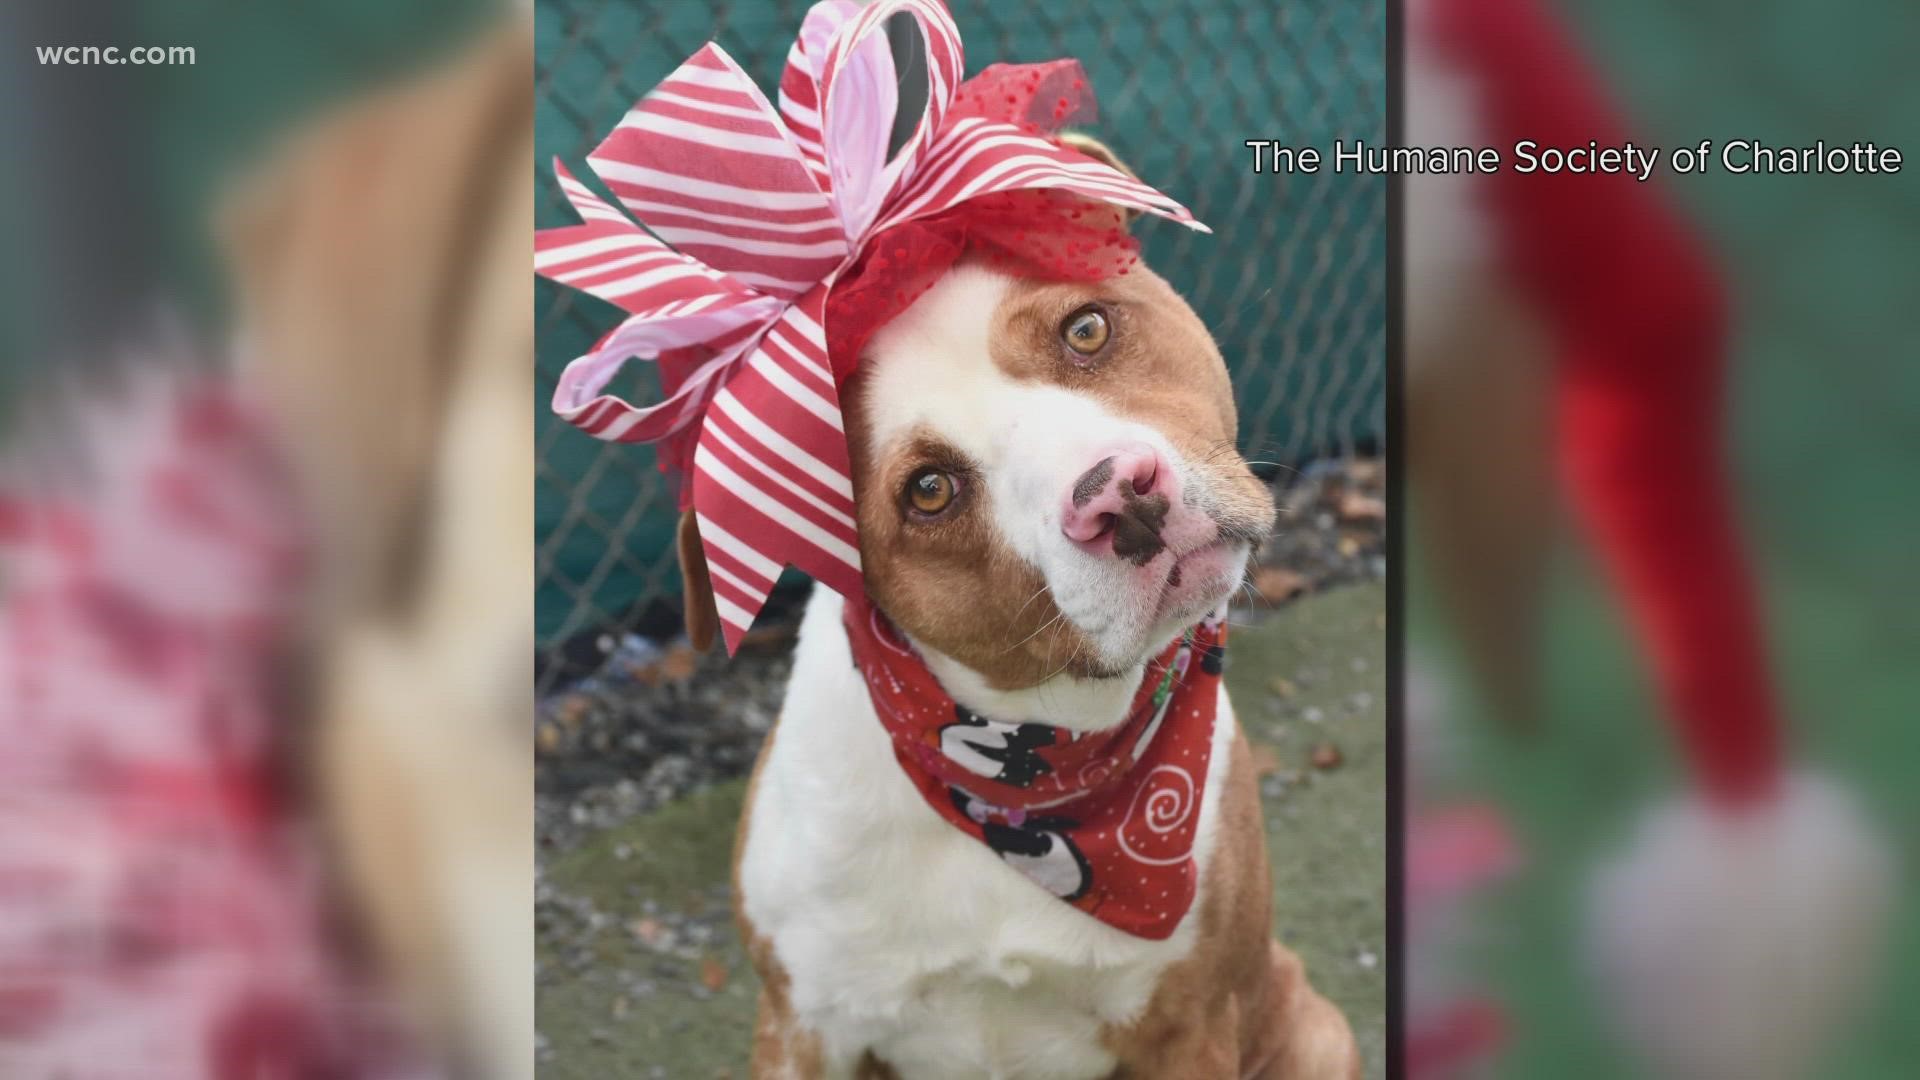 The Humane Society of Charlotte is working to find loving homes for pets this holiday season.